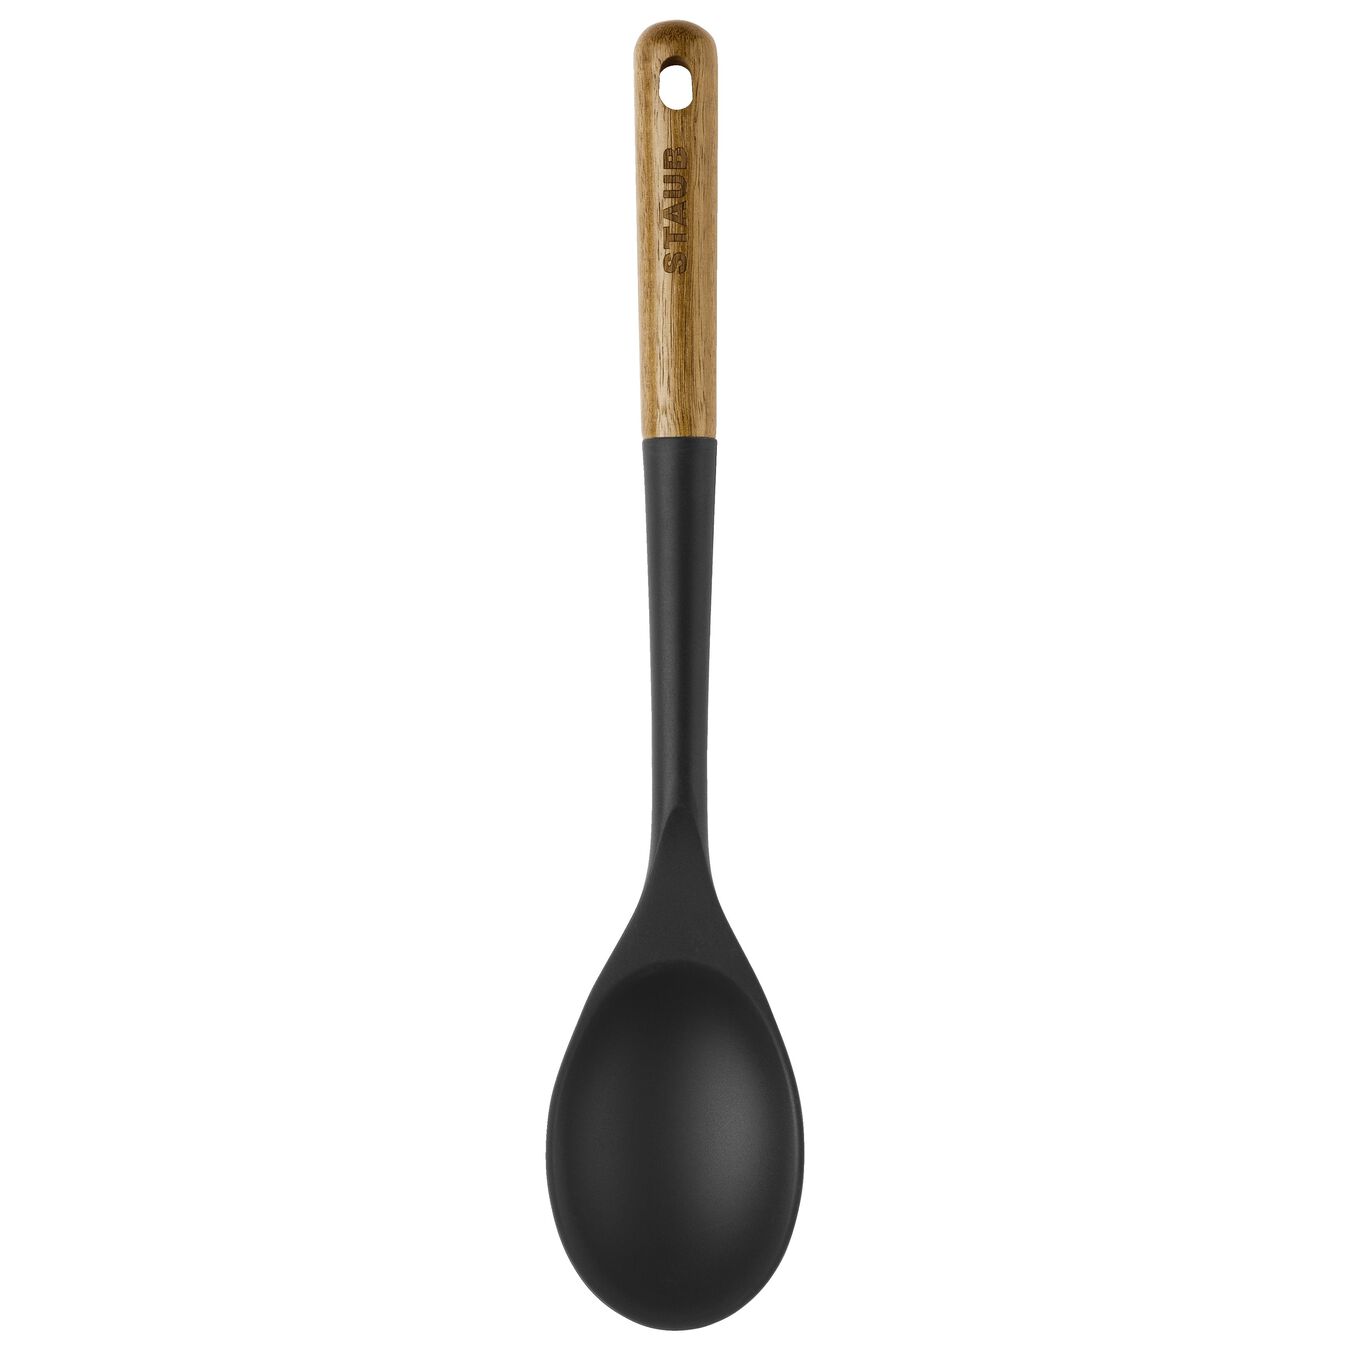 Serving spoon, 31 cm, Silicone,,large 2